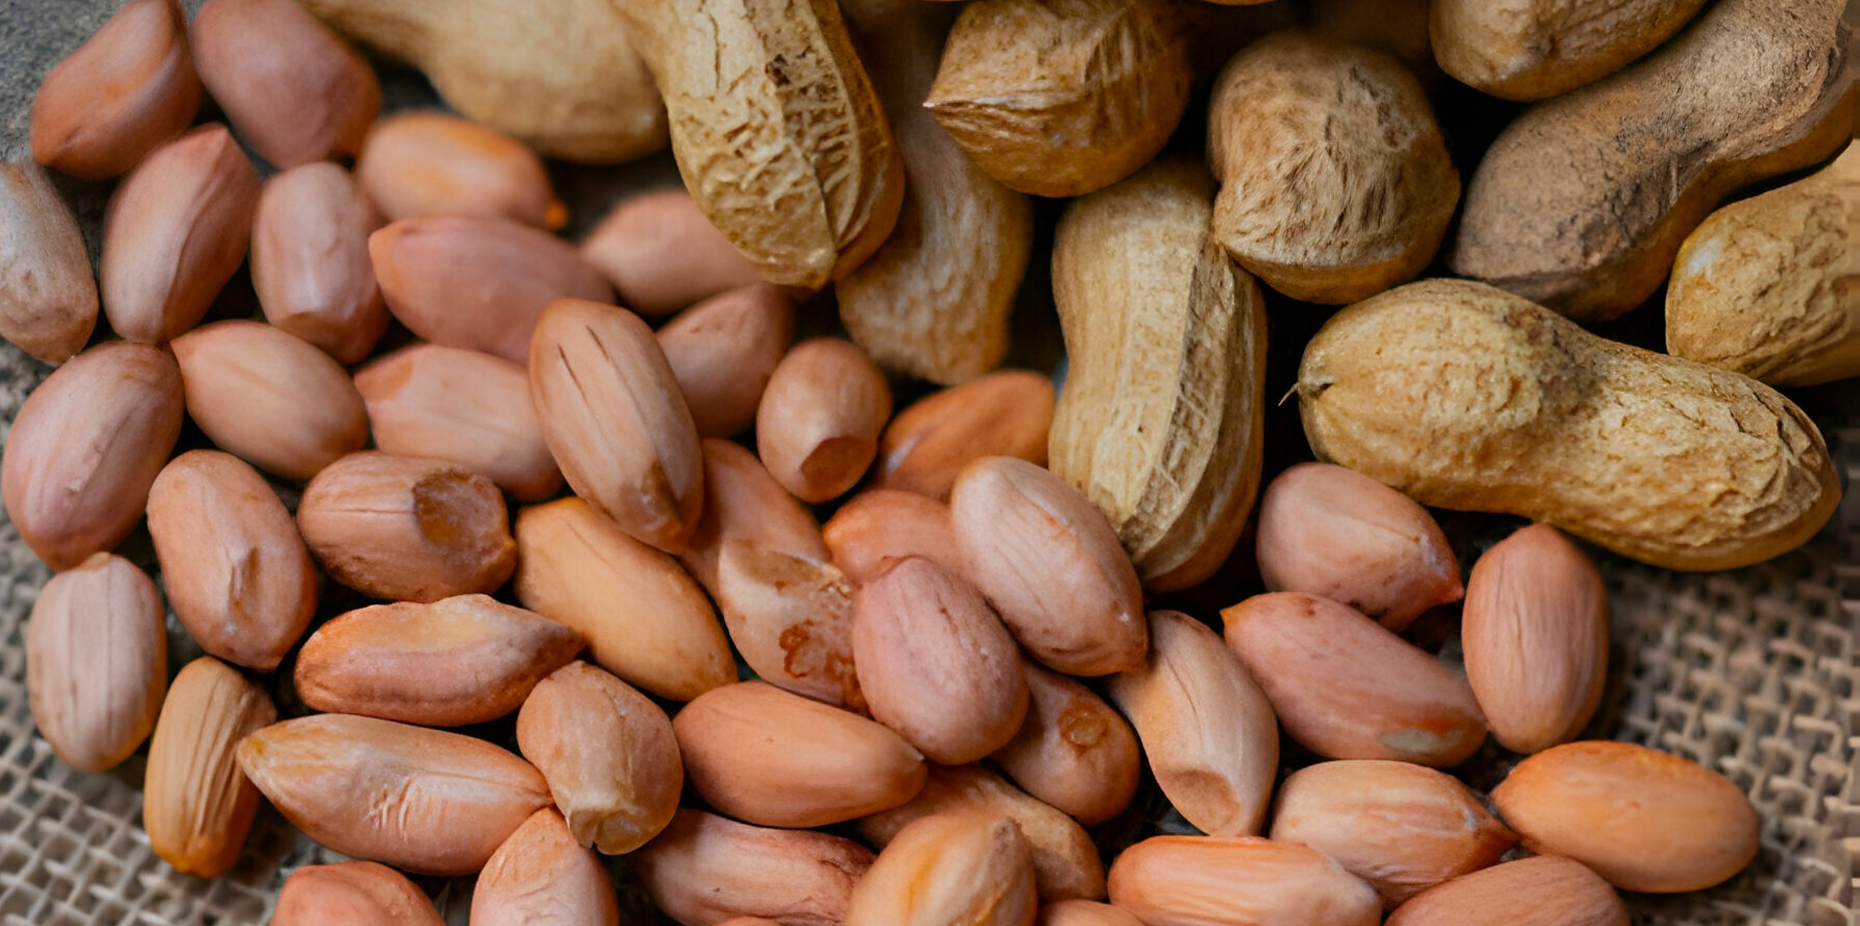 Peanuts: Facts, Nutrition, Benefits, & More